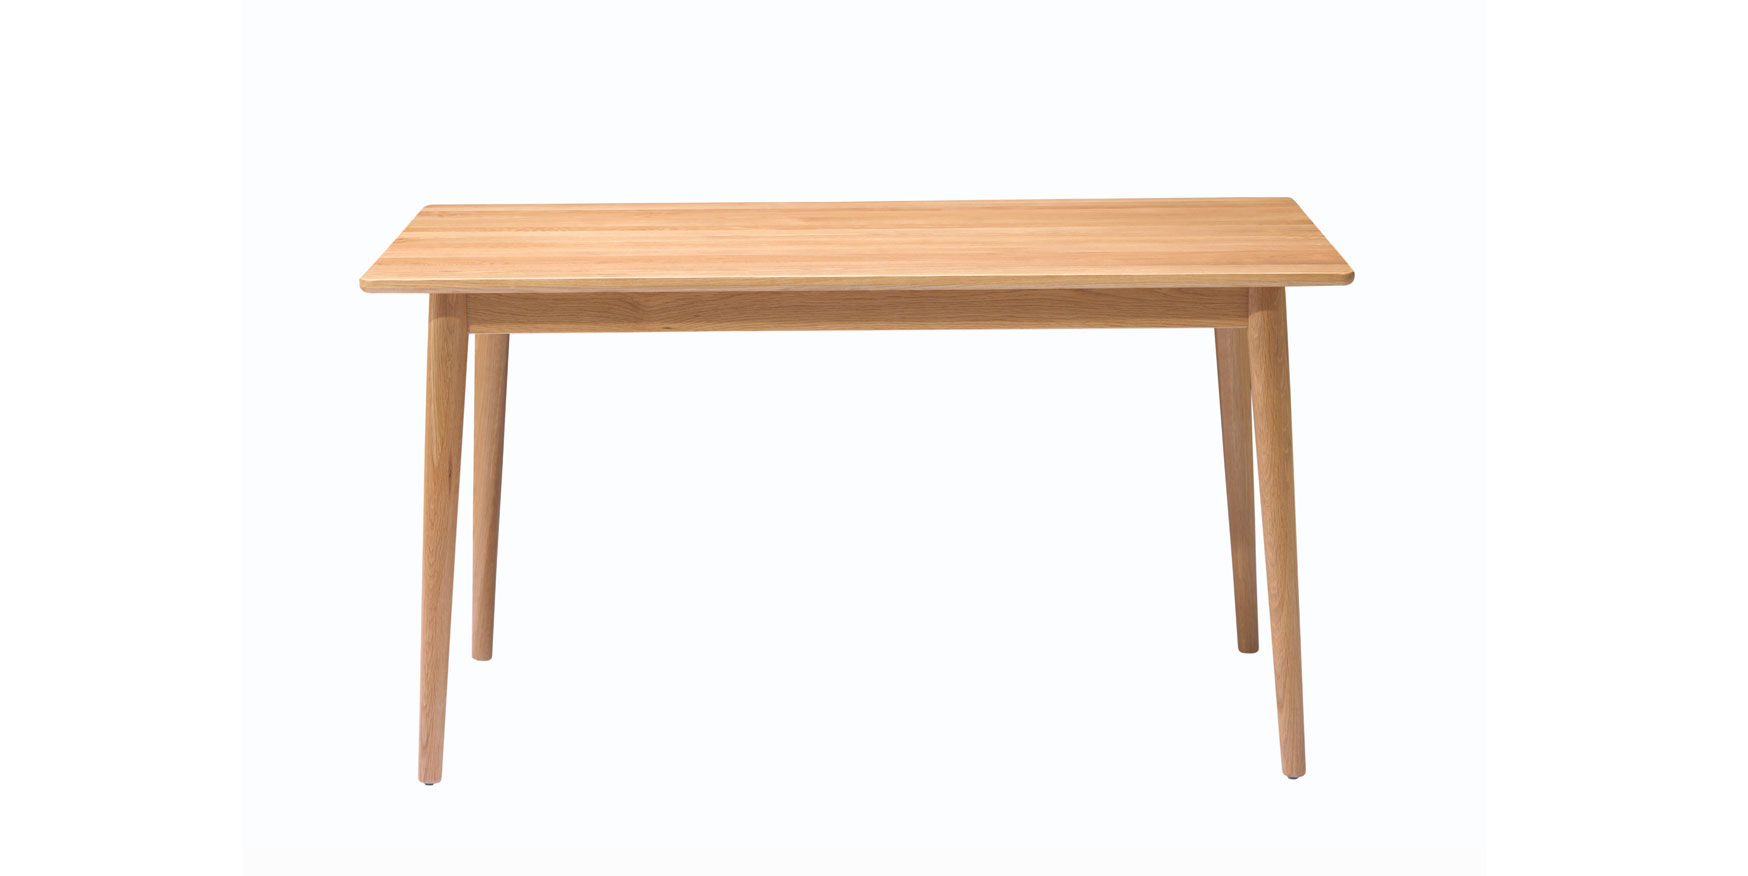 DT15 Dining Table Modern Nordic Wooden Table Solid Wood Table